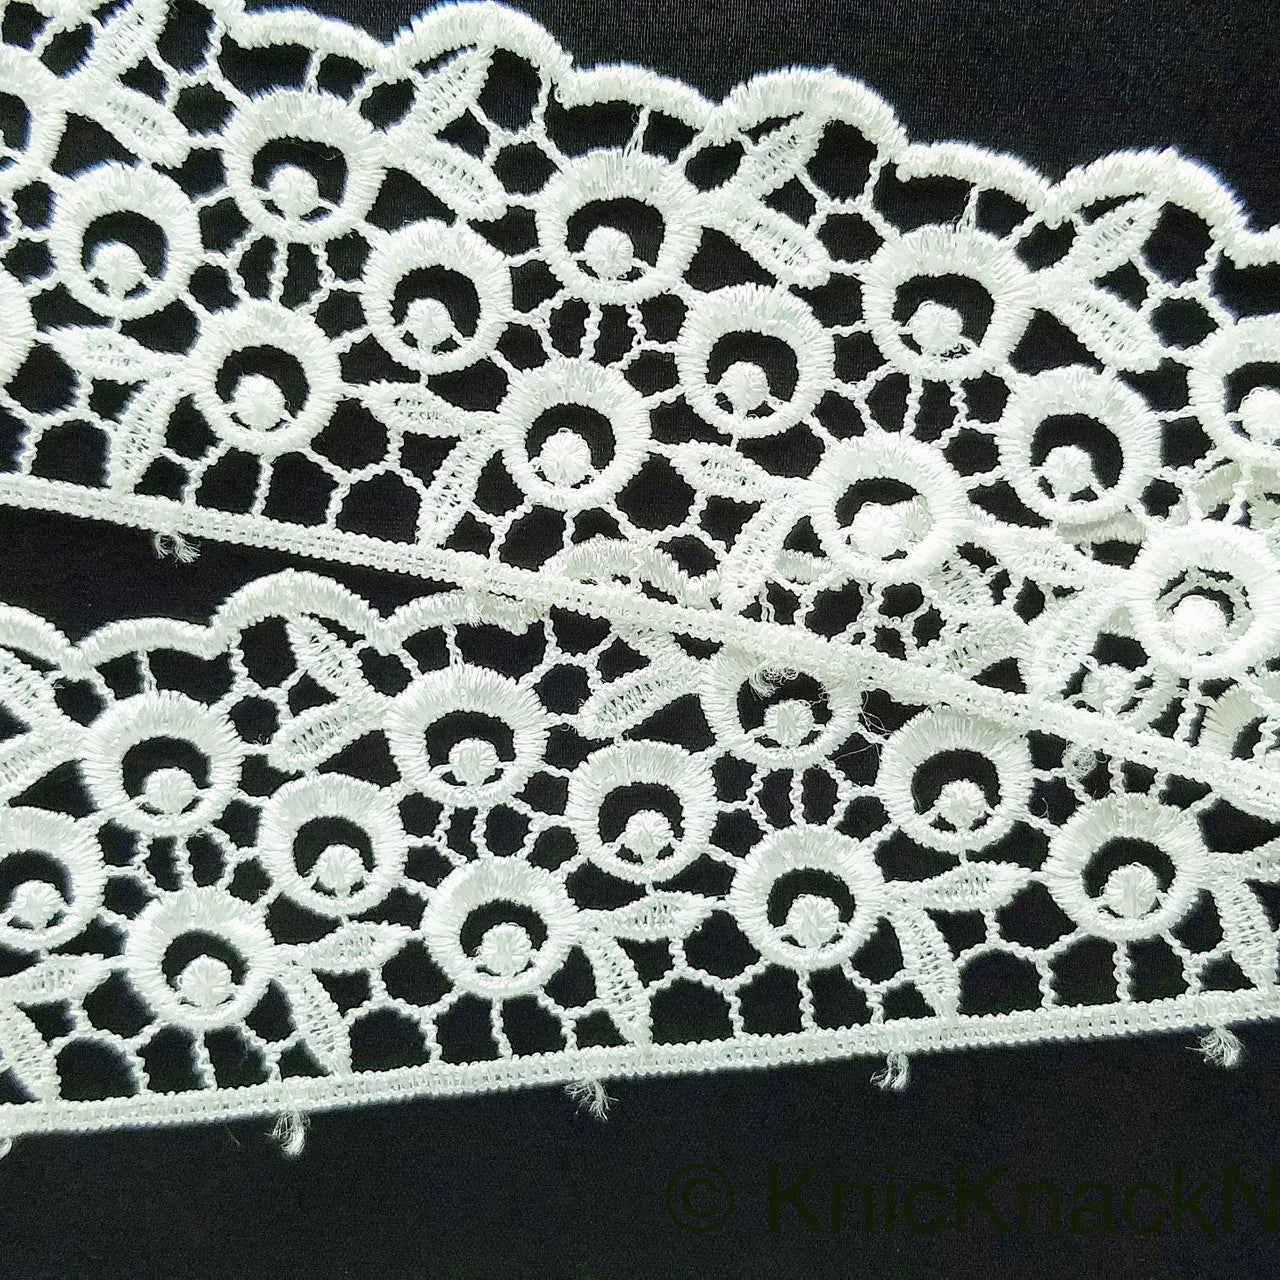 Off White Flower Embroidery Floral Lace Trim, Crochet Lace, Dyeable Trim